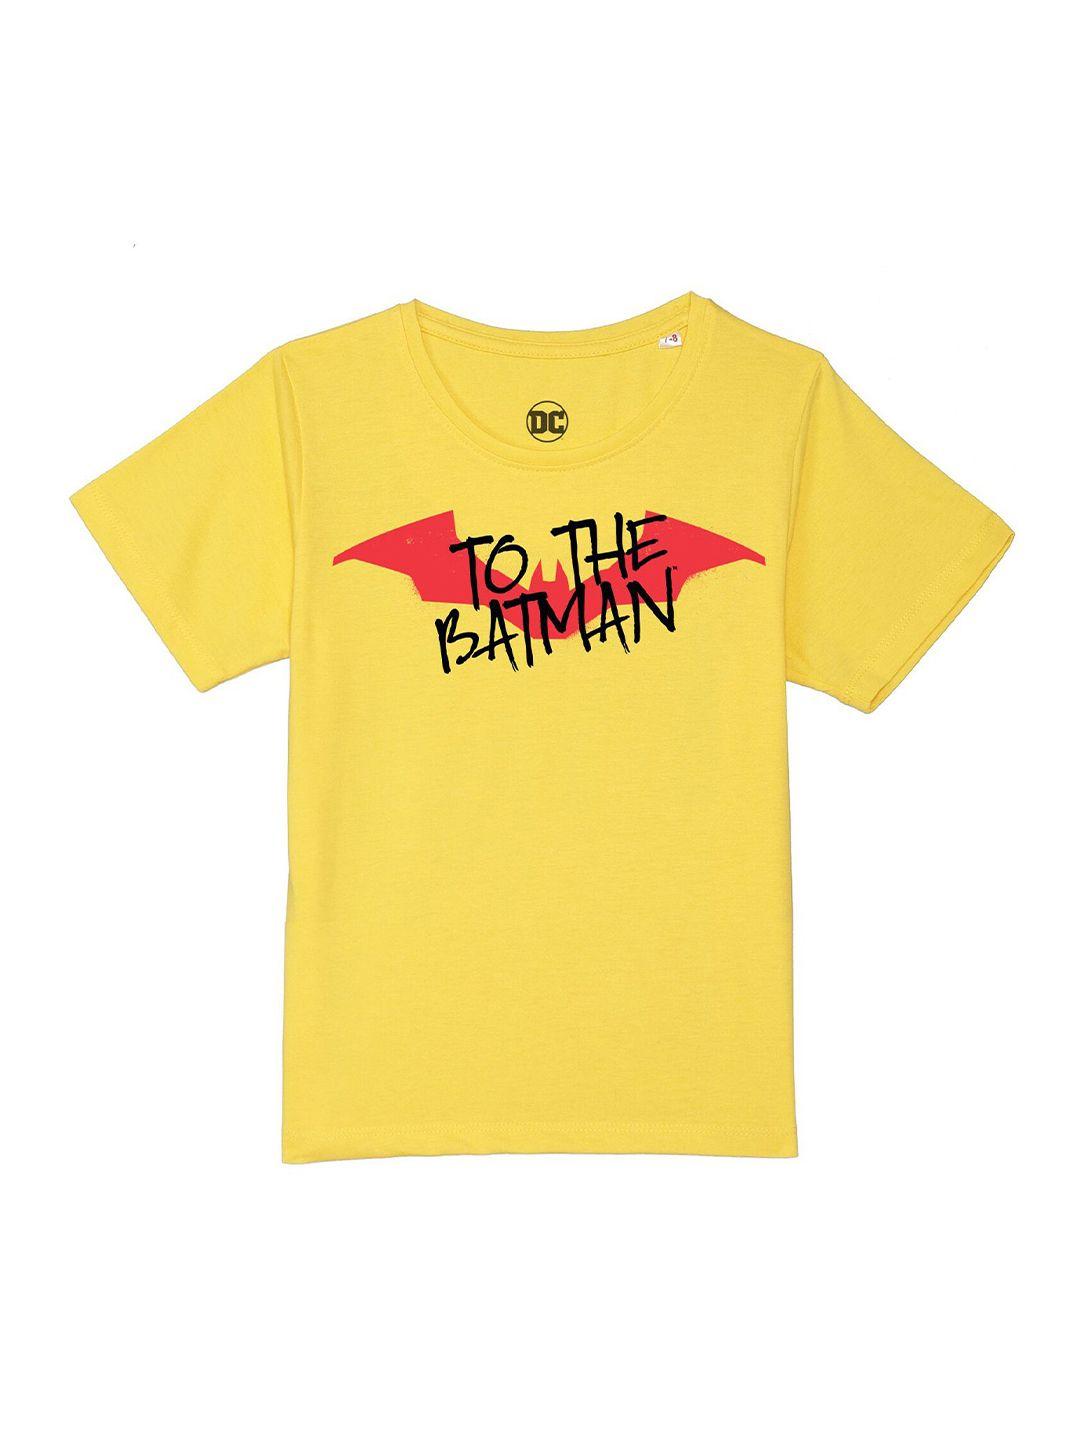 dc-by-wear-your-mind-boys-yellow-&-black-typography-batman-printed-t-shirt